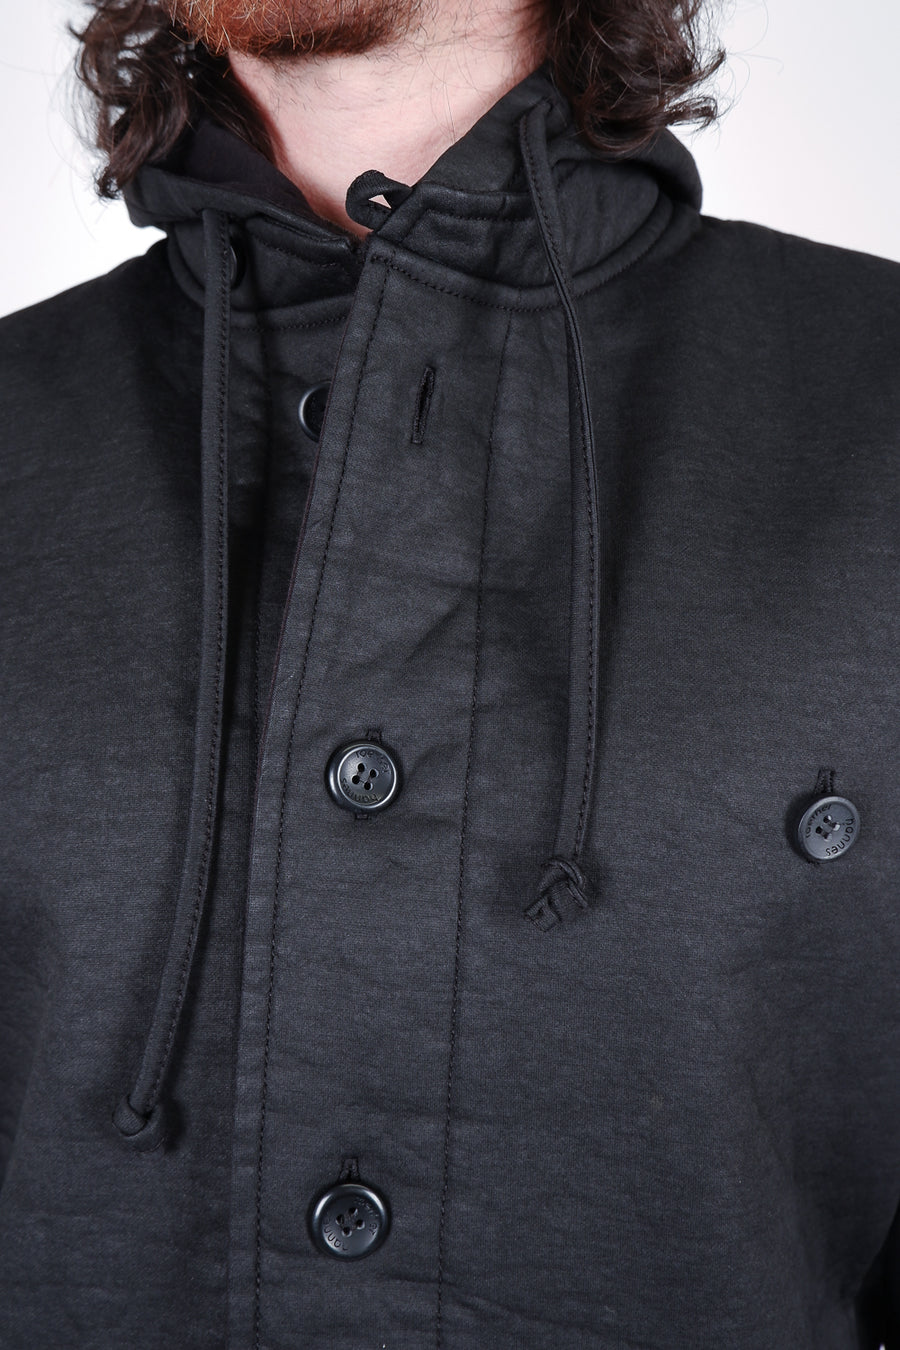 Buy the Hannes Roether Waxed Cotton Button-Up Hoodie in Black at Intro. Spend £50 for free UK delivery. Official stockists. We ship worldwide.